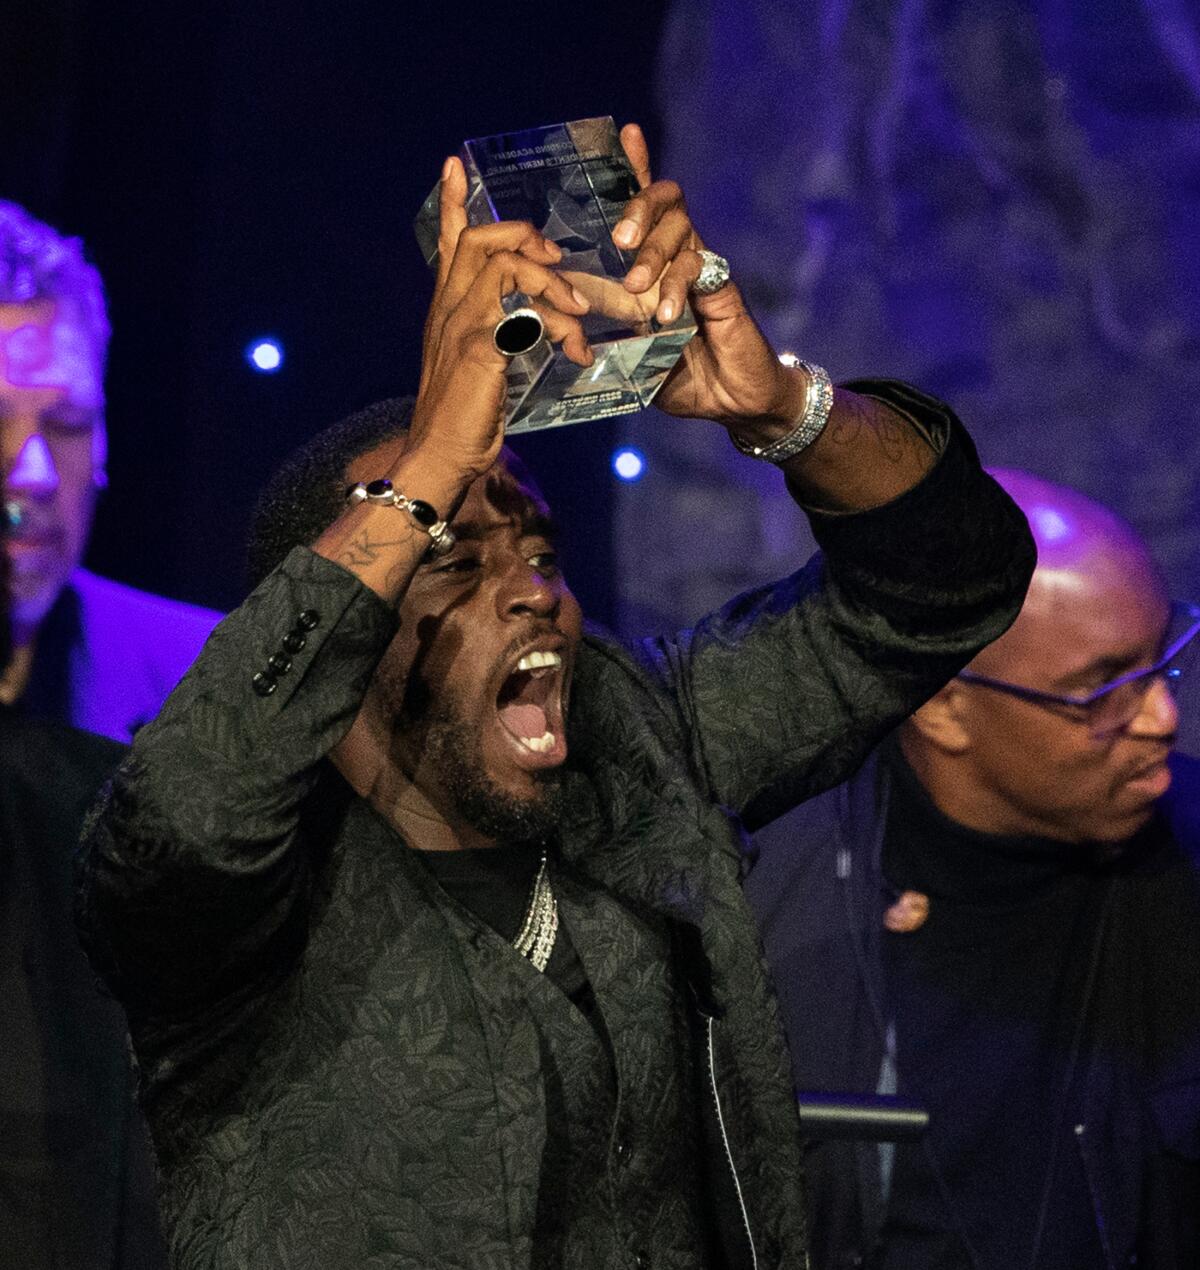 Sean "Diddy" Combs accepts the Industry Icon award at Clive Davis' annual pre-Grammy gala on Saturday night at the Beverly Hilton.